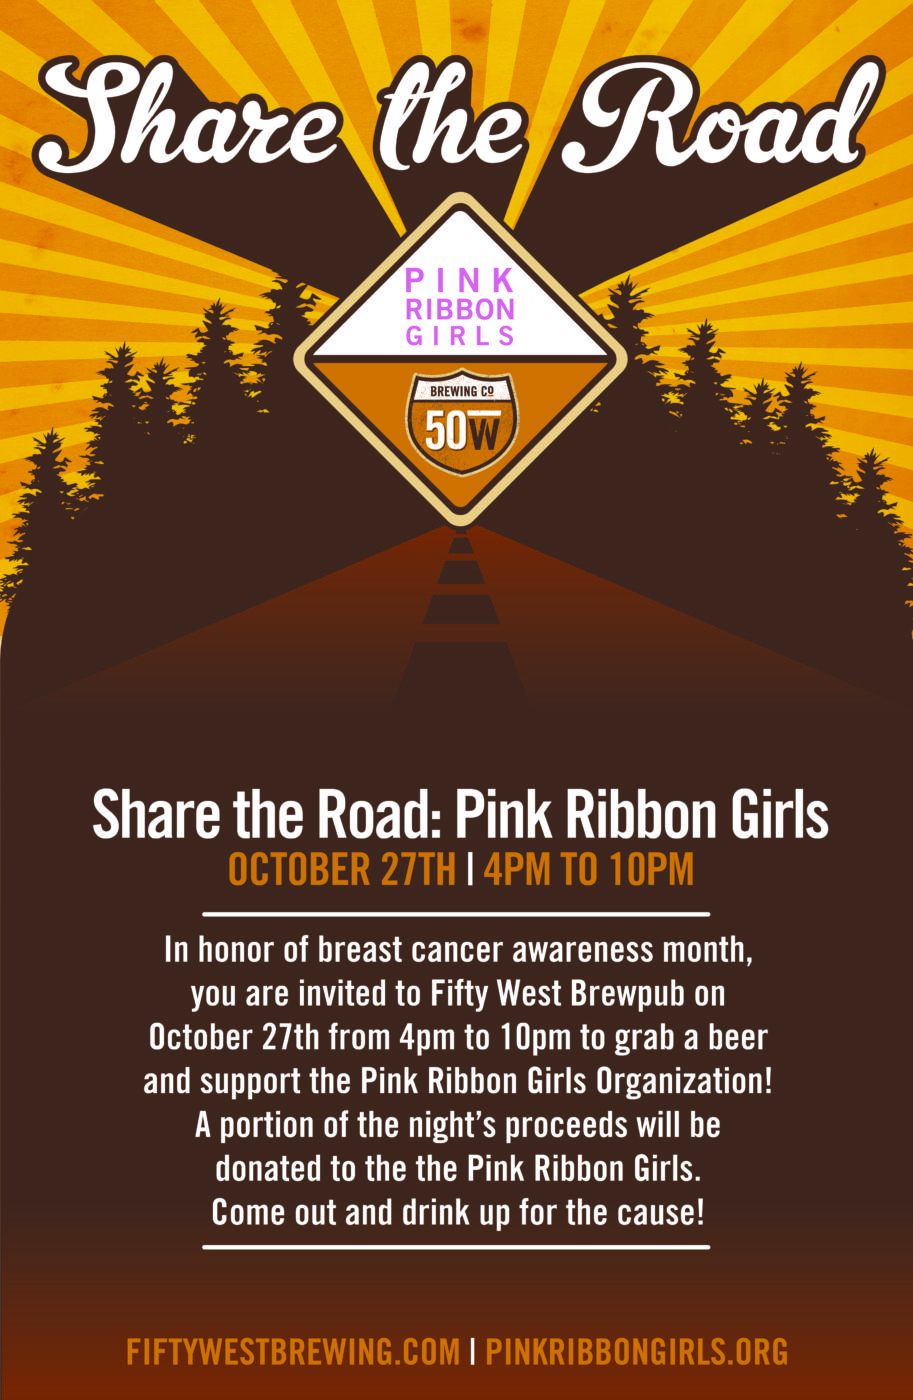 share-the-road-pink-ribbon-girls-01-1